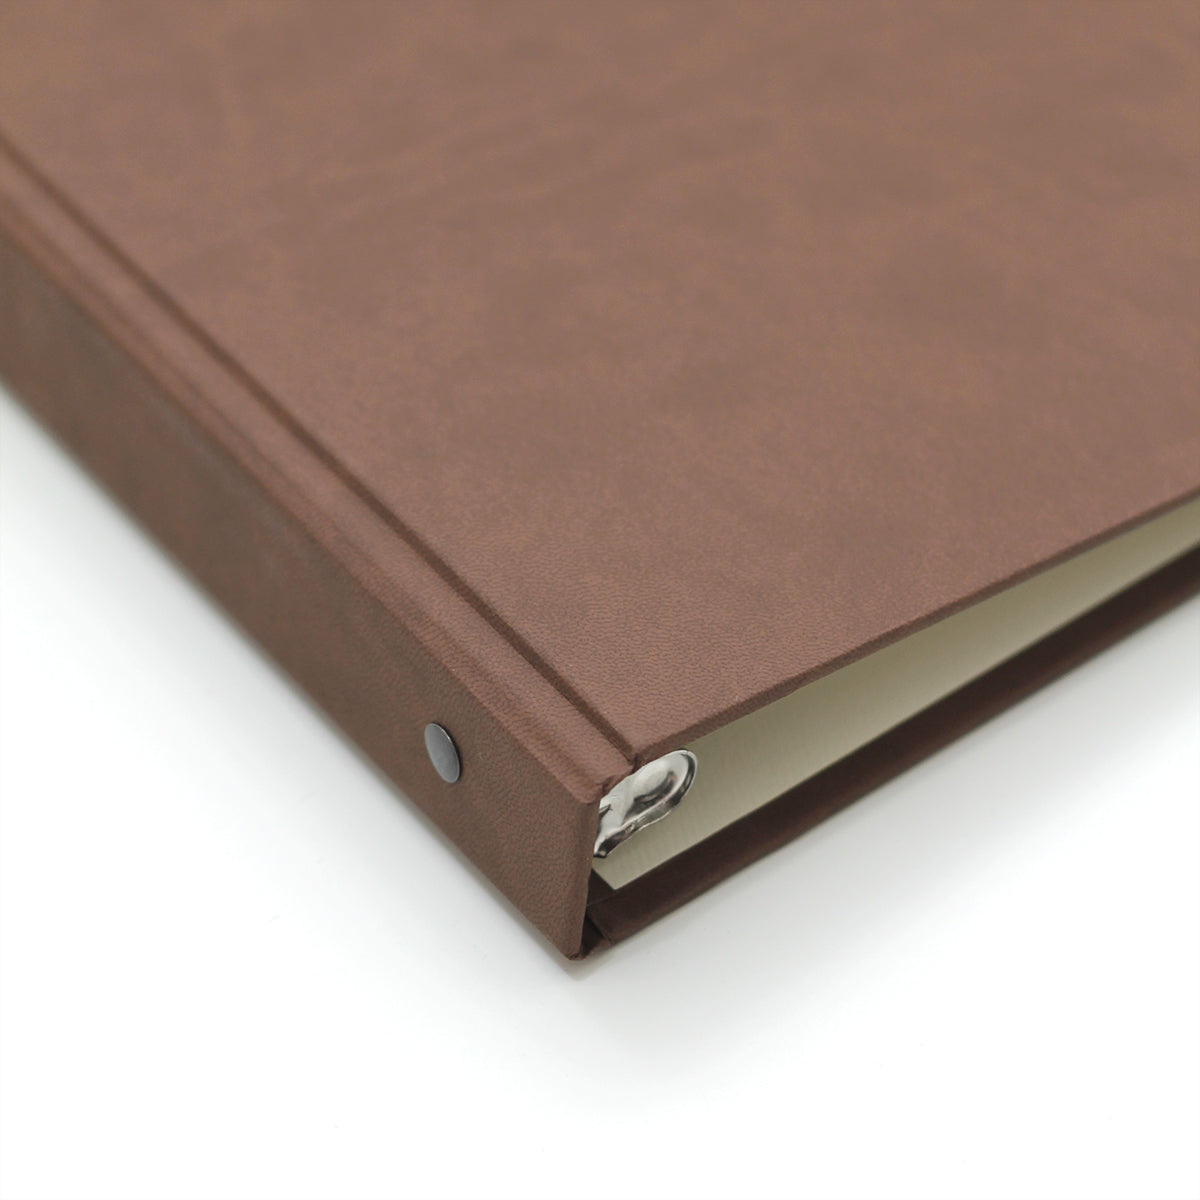 Storage Binder for Photos or Documents with Mocha Vegan Leather Cover